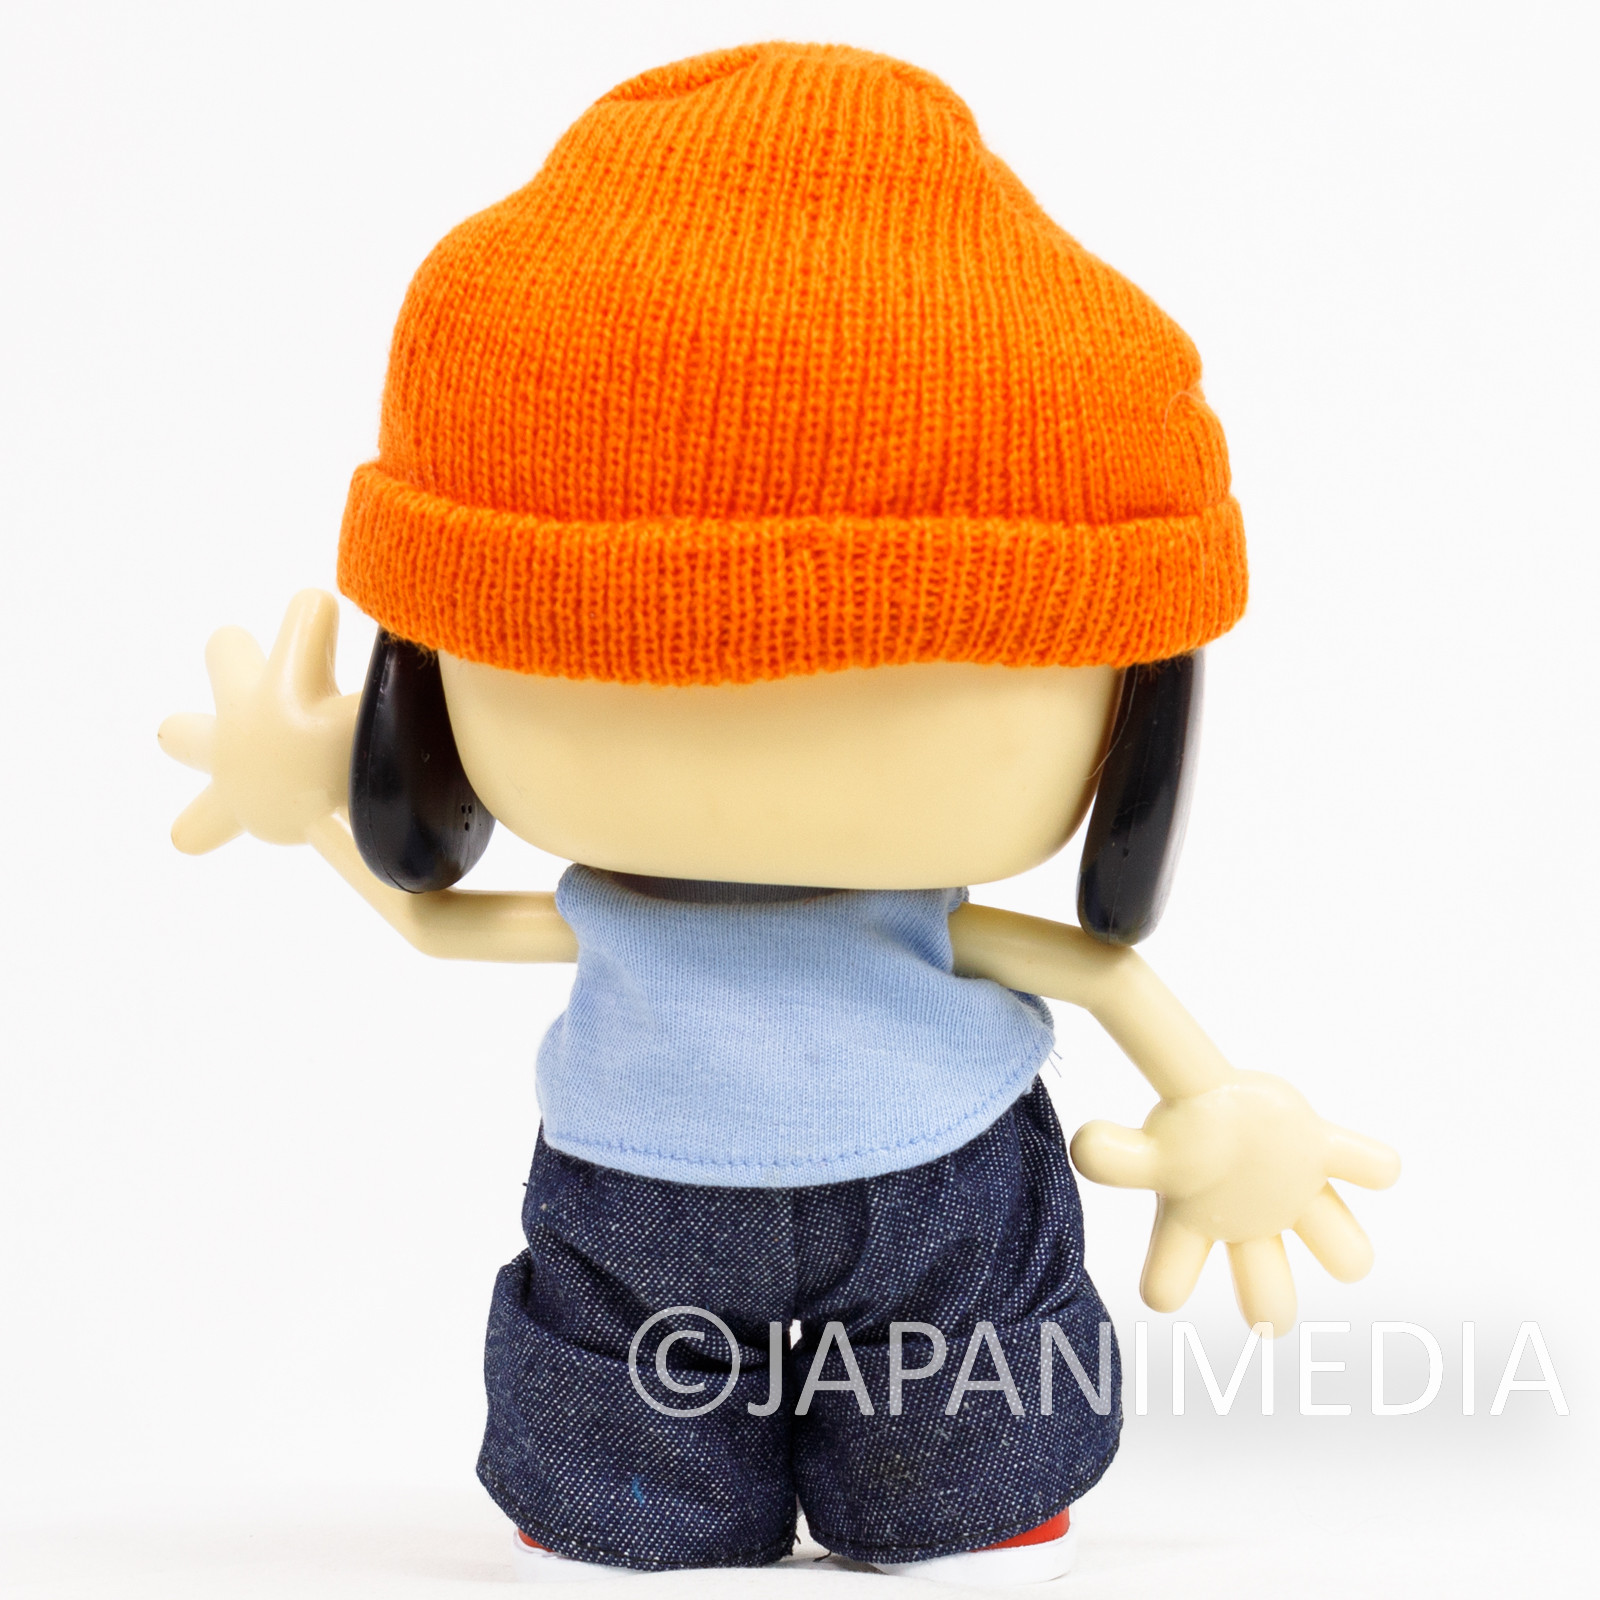 Parappa The Rapper Parappa Collectible Doll Figure Medicom Toy JAPAN GAME